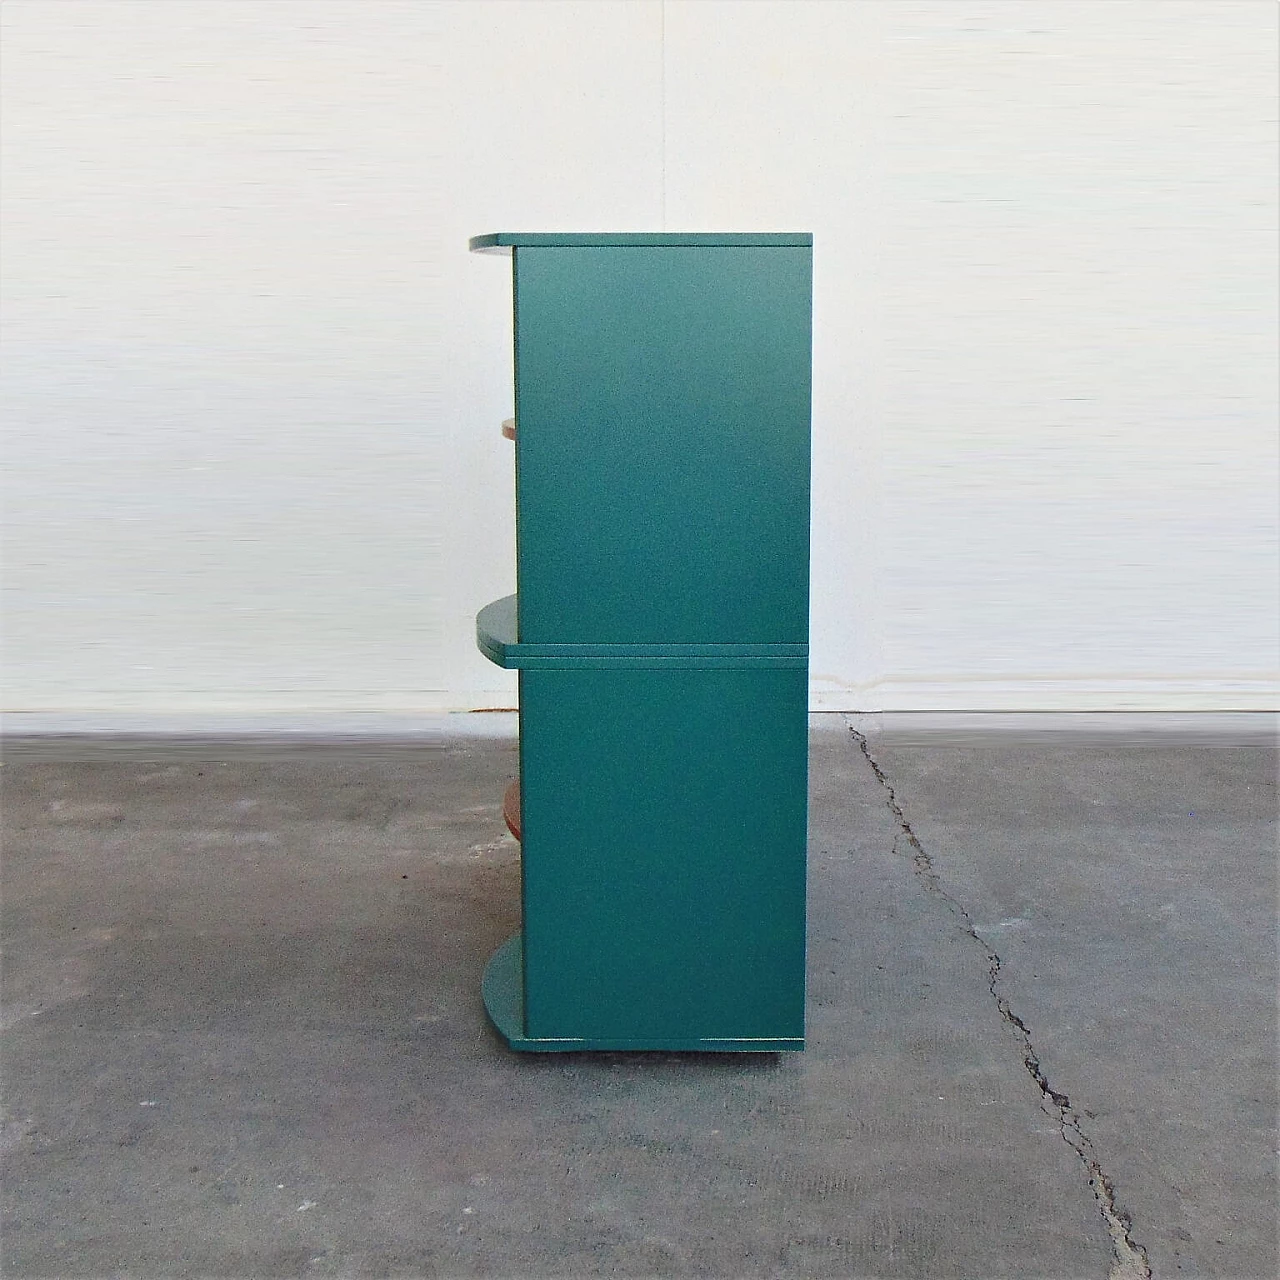 Sideboard Green Satin Lacquer, Doors in Walnut-Stained Cherry, for Roche Bobois, 1990s 1167296